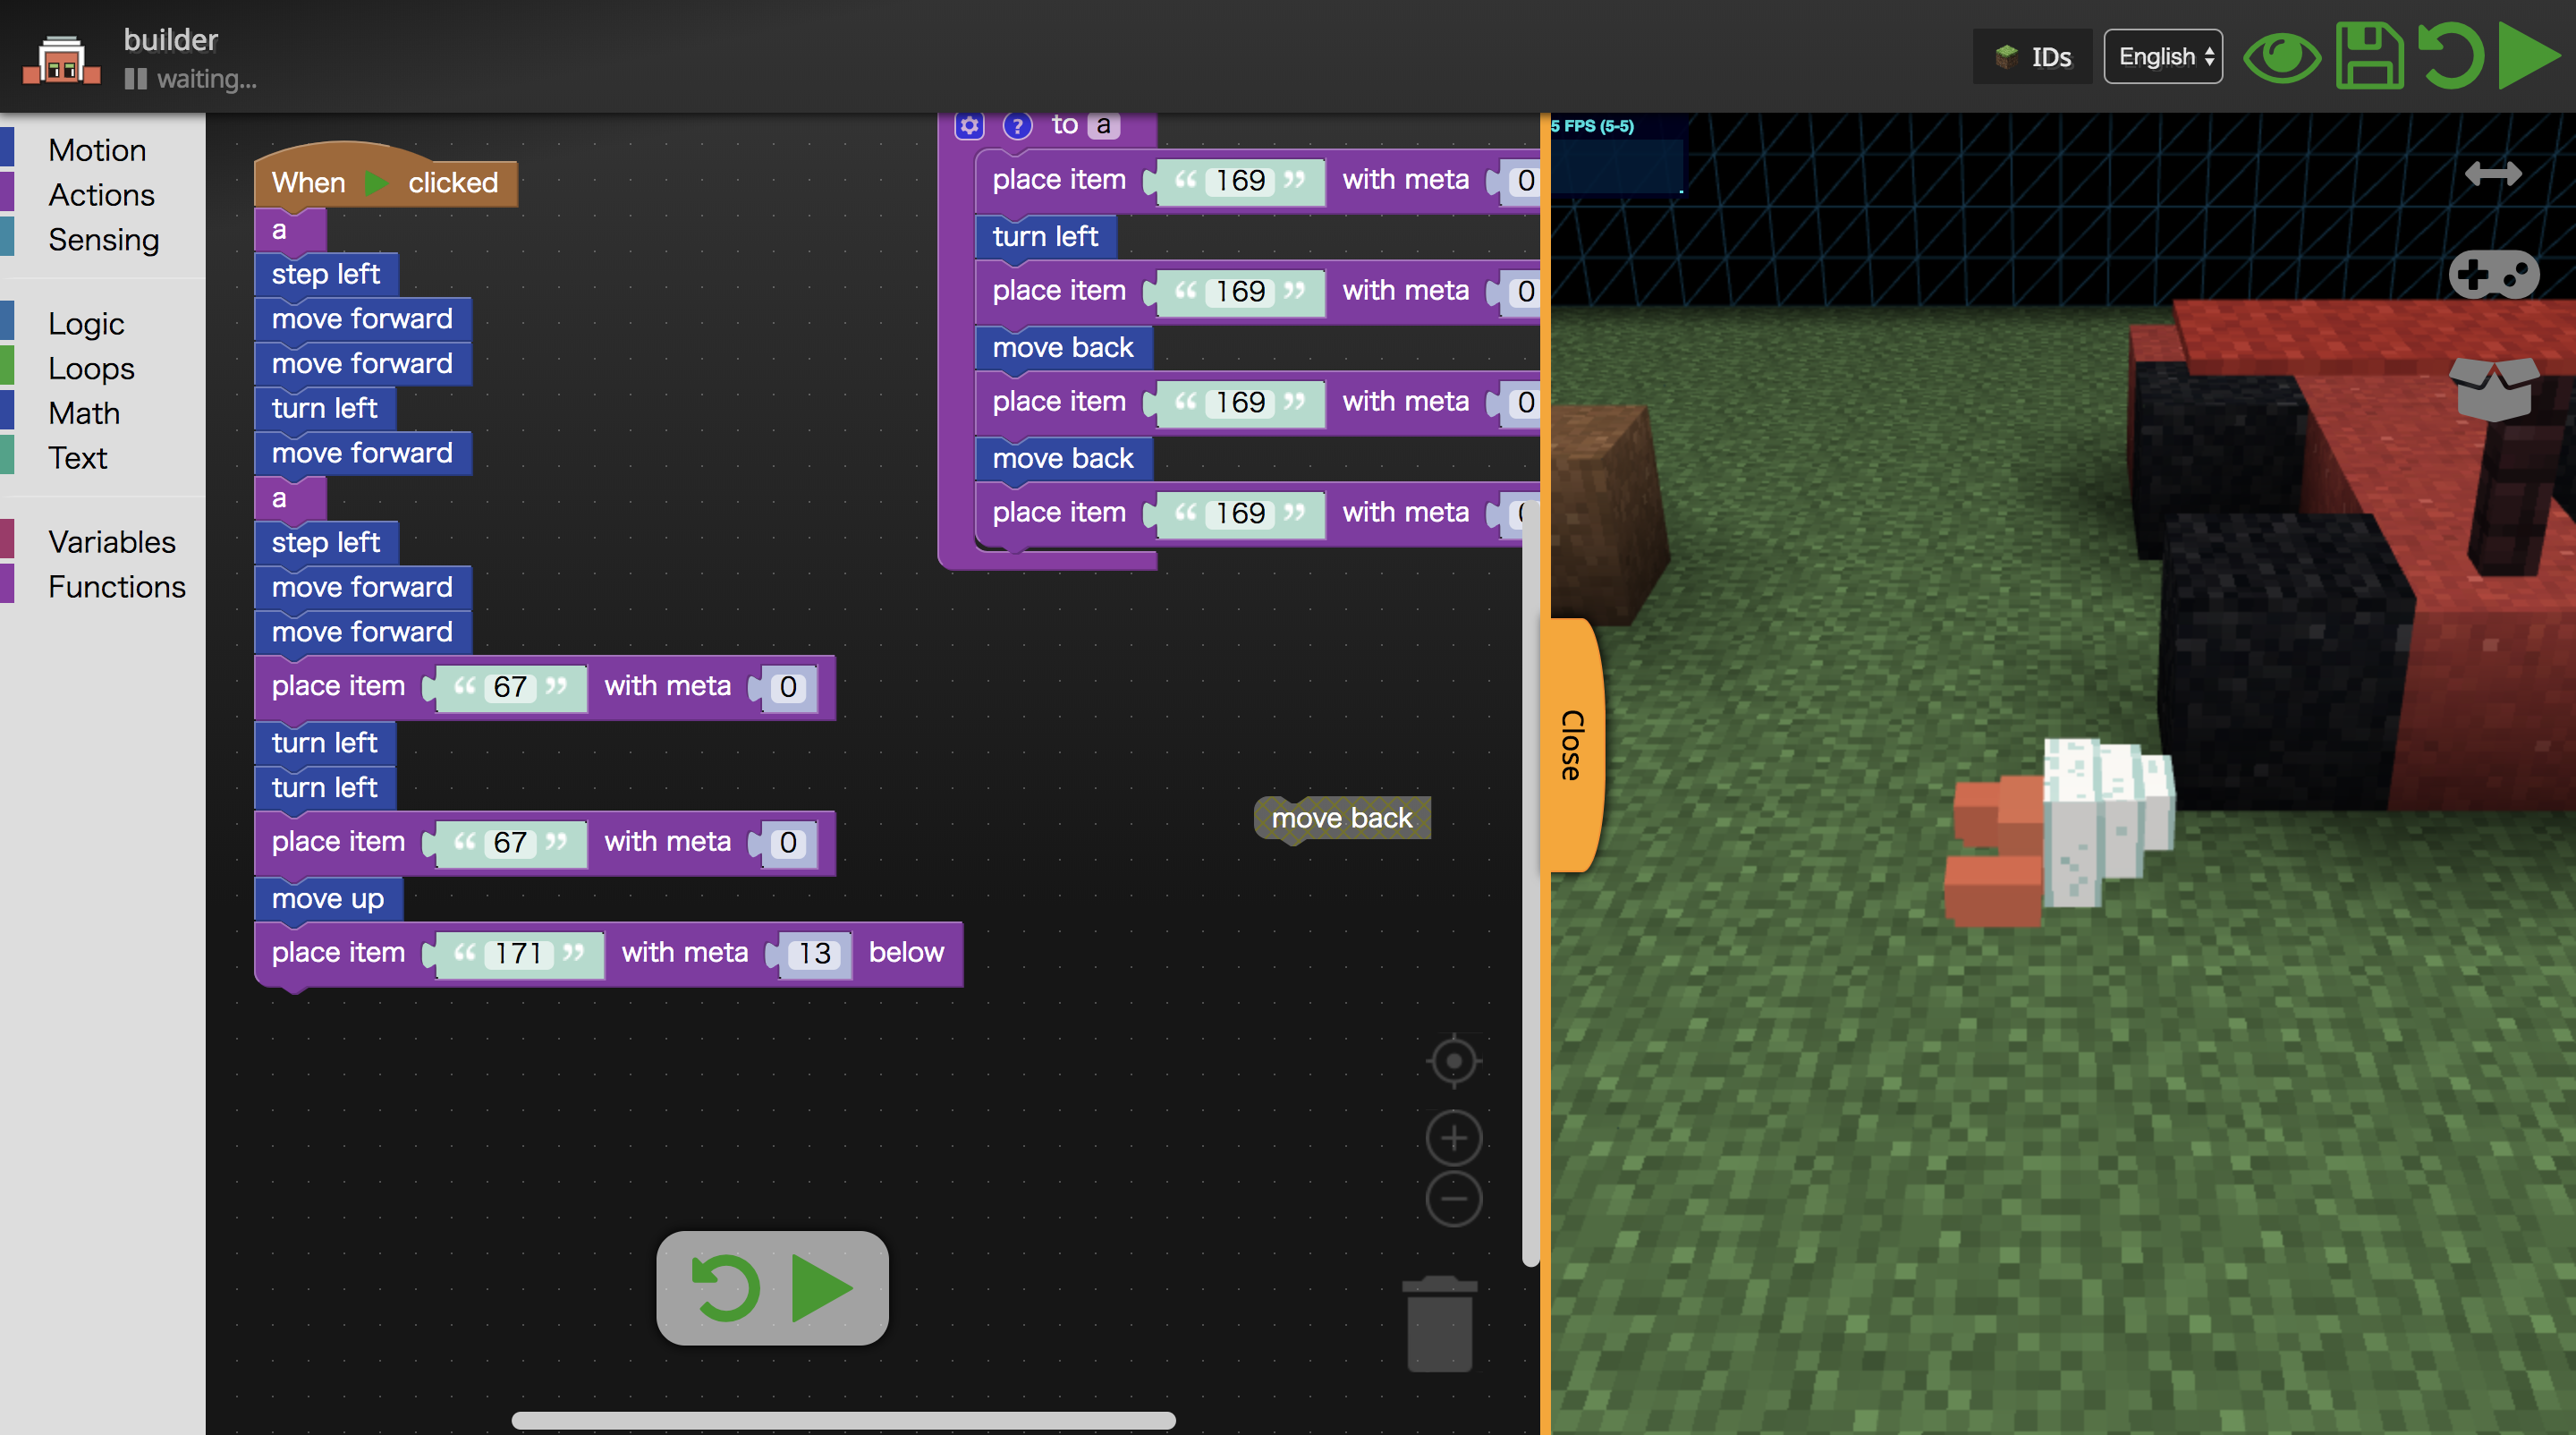 Coding with Minecraft